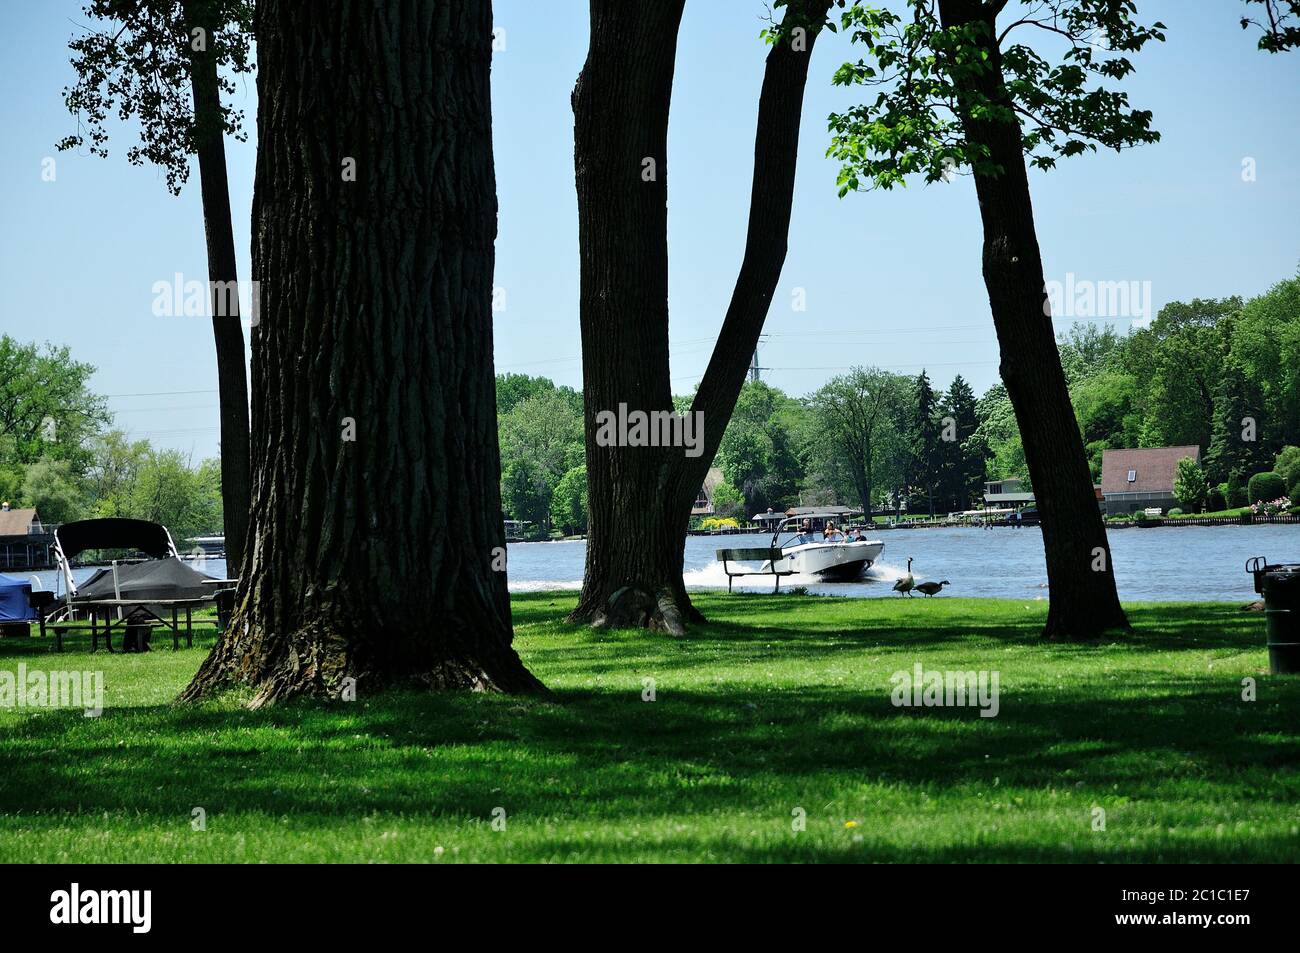 Lions Park on the Fox River in Illinois, USA. Stock Photo